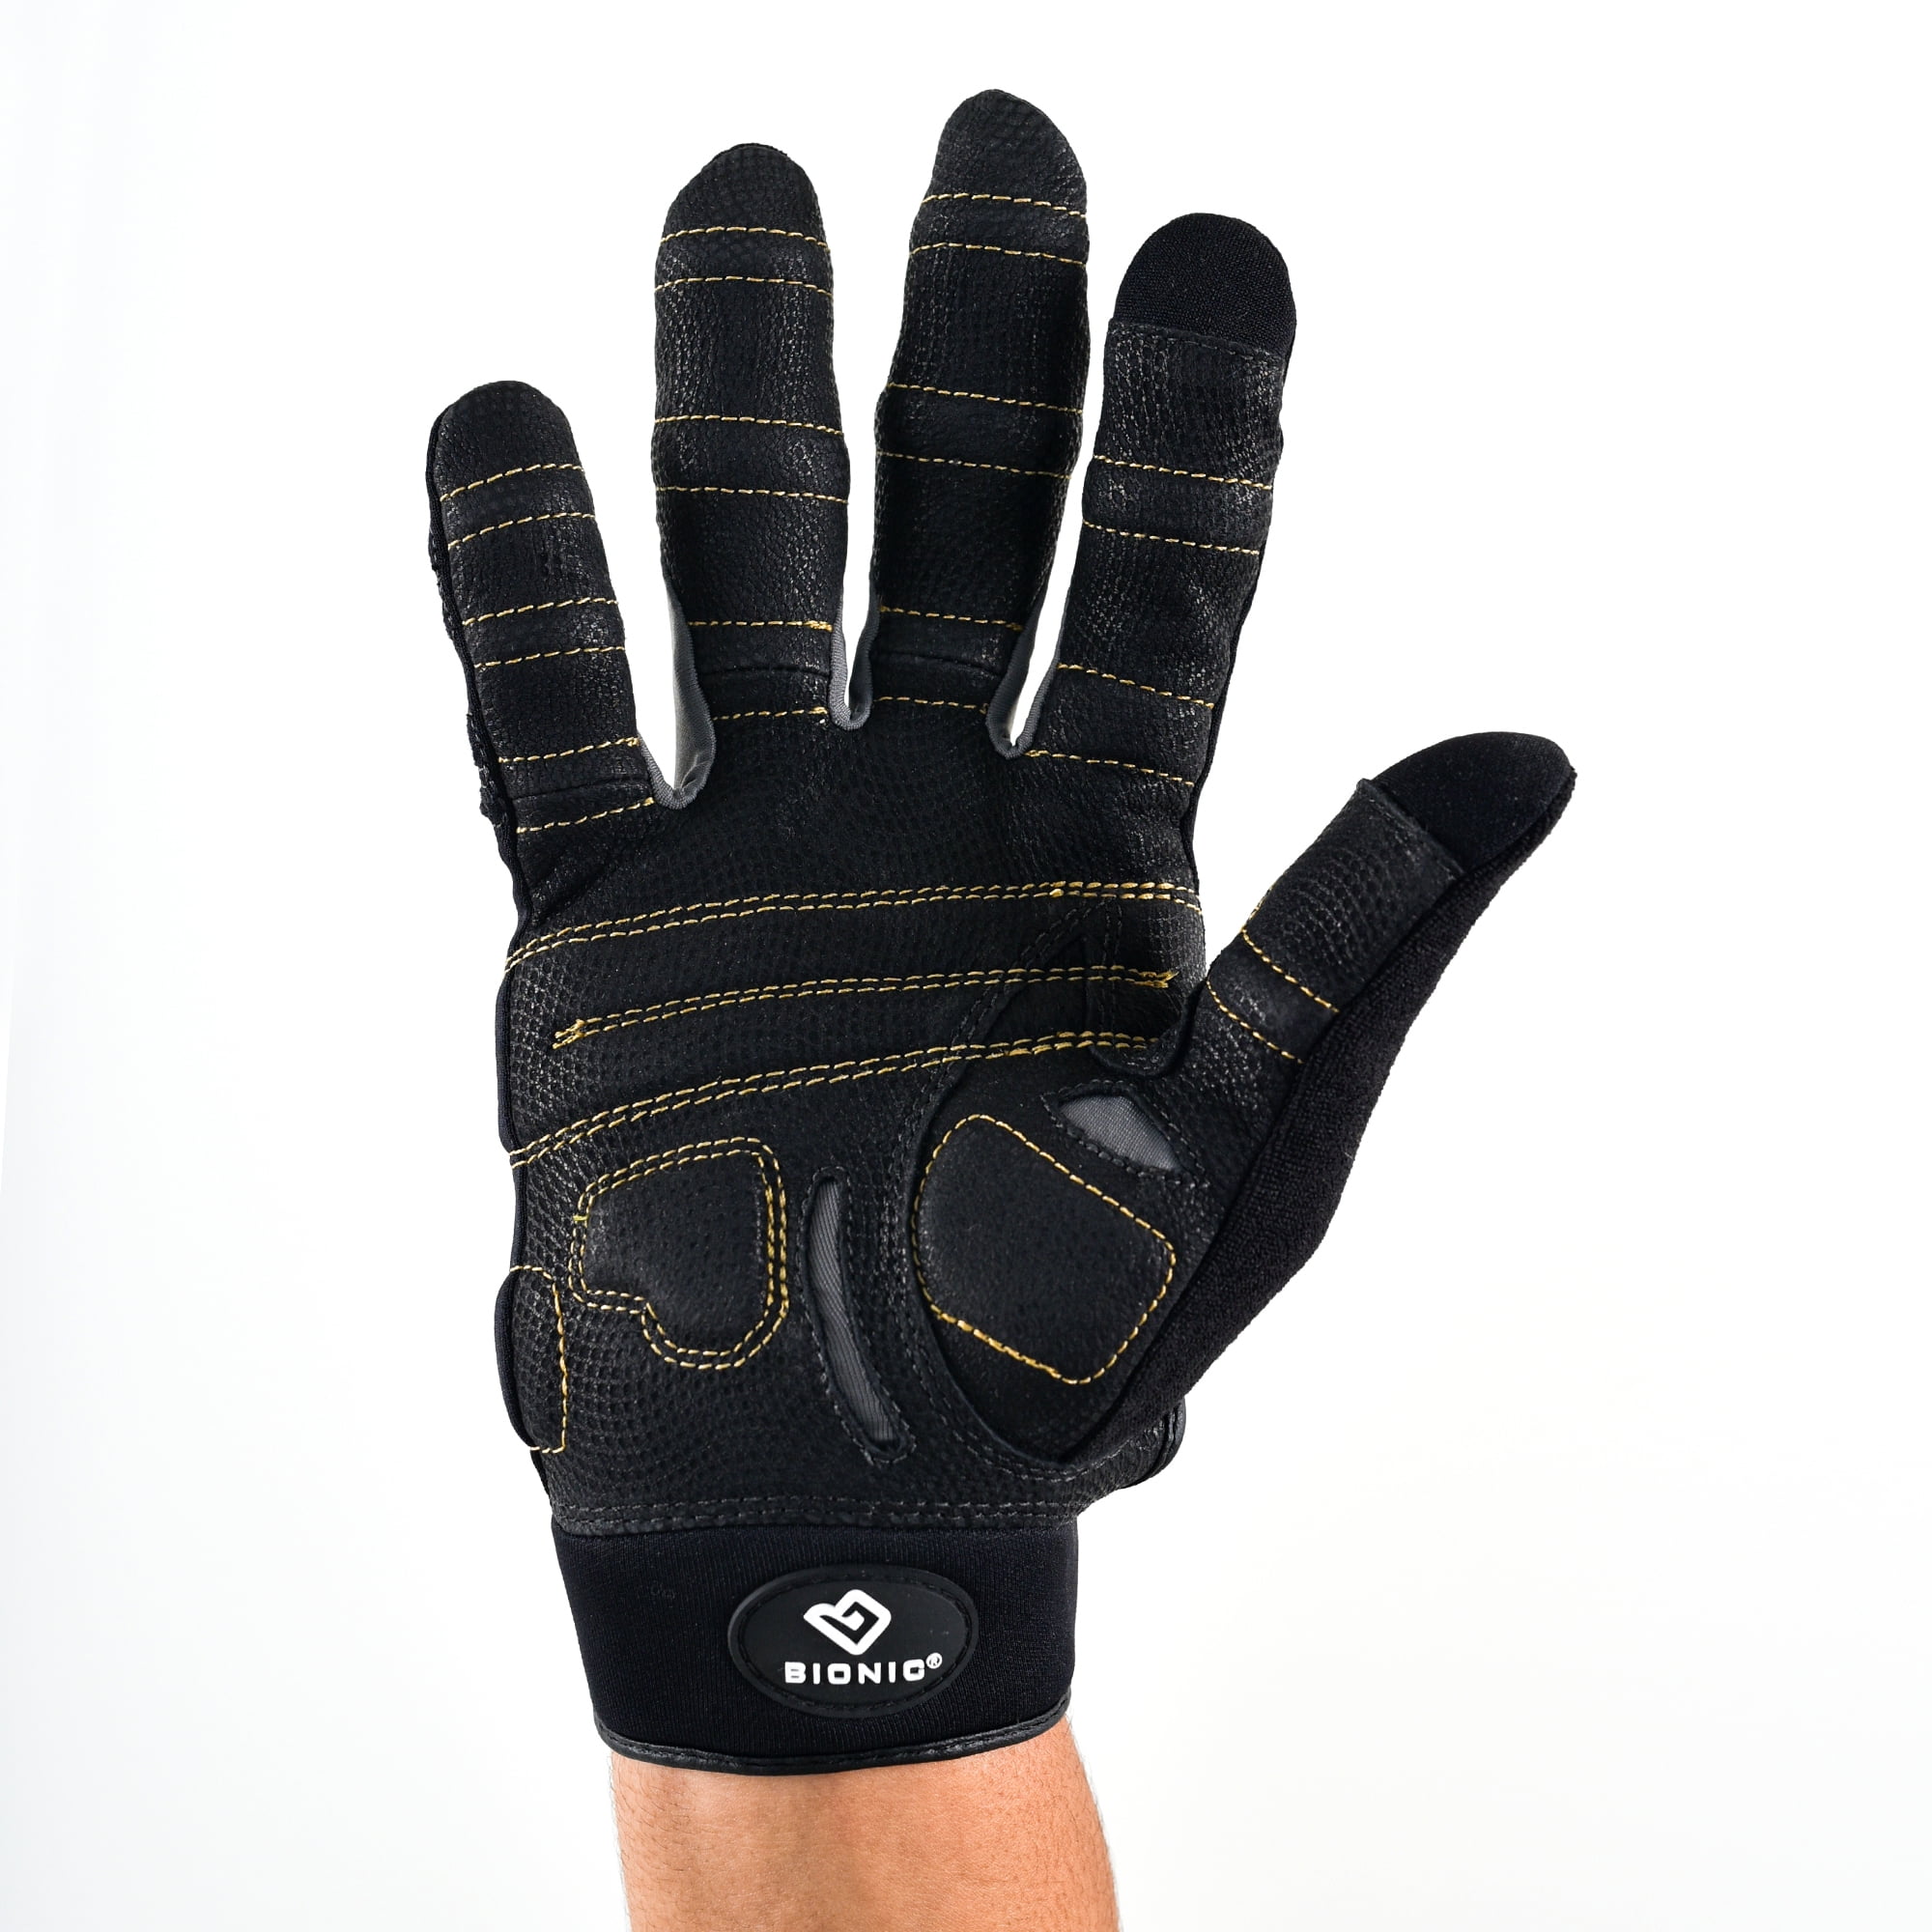 Work out Gloves Full Fingered Hand Grip Gym Gloves Weightlifting Crossfit Black 